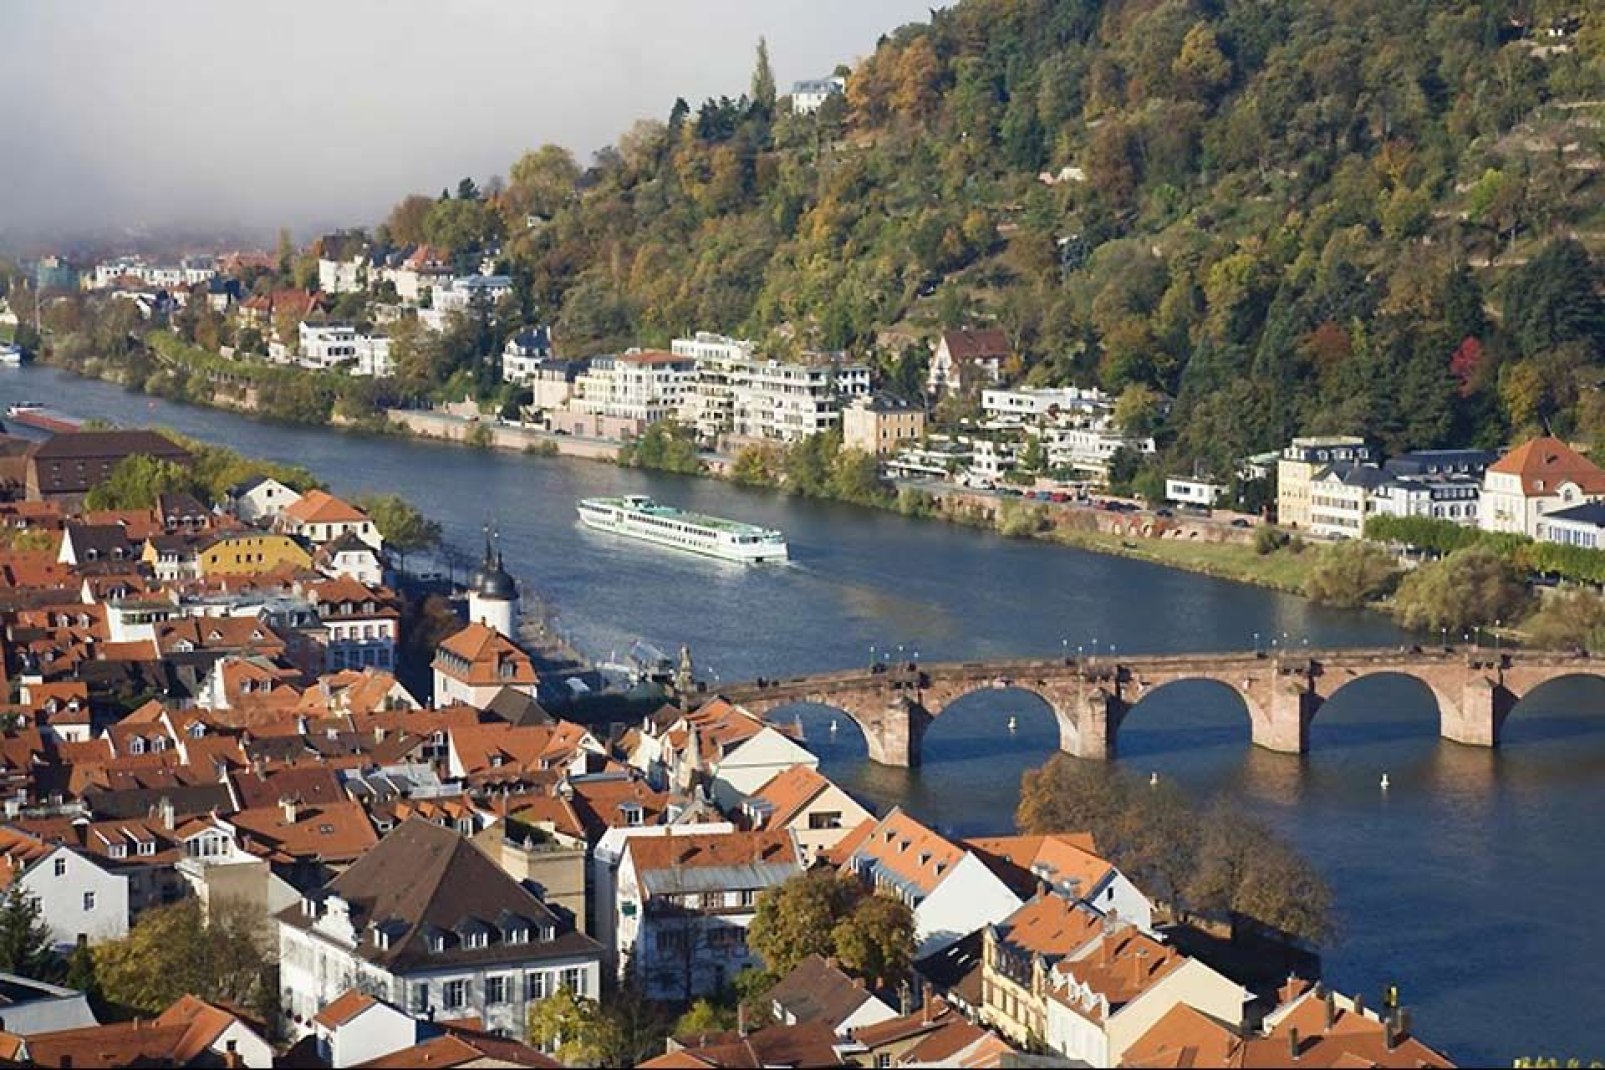 Heidelberg is a beautiful place to visit.